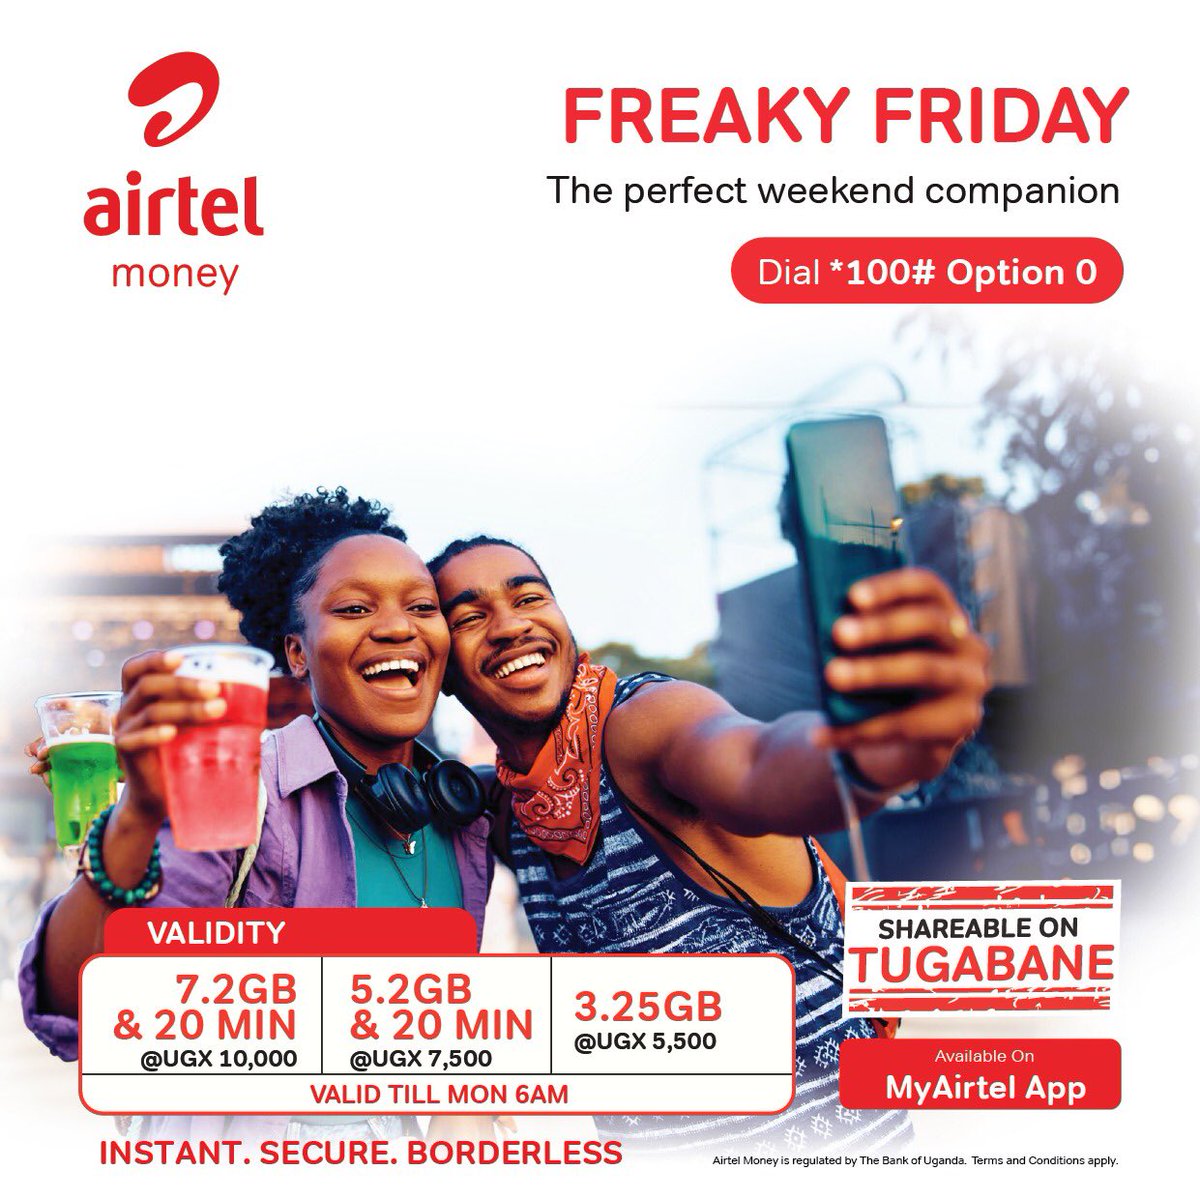 Fridays are for #FreakyFriday from @Airtel_Ug. Dial *100# and select option 0 or use #MyAirtelApp airtelafrica.onelink.me/cGyr/qgj4qeu2 Follow @Airtel_Ug so that you get to know what they have for you.